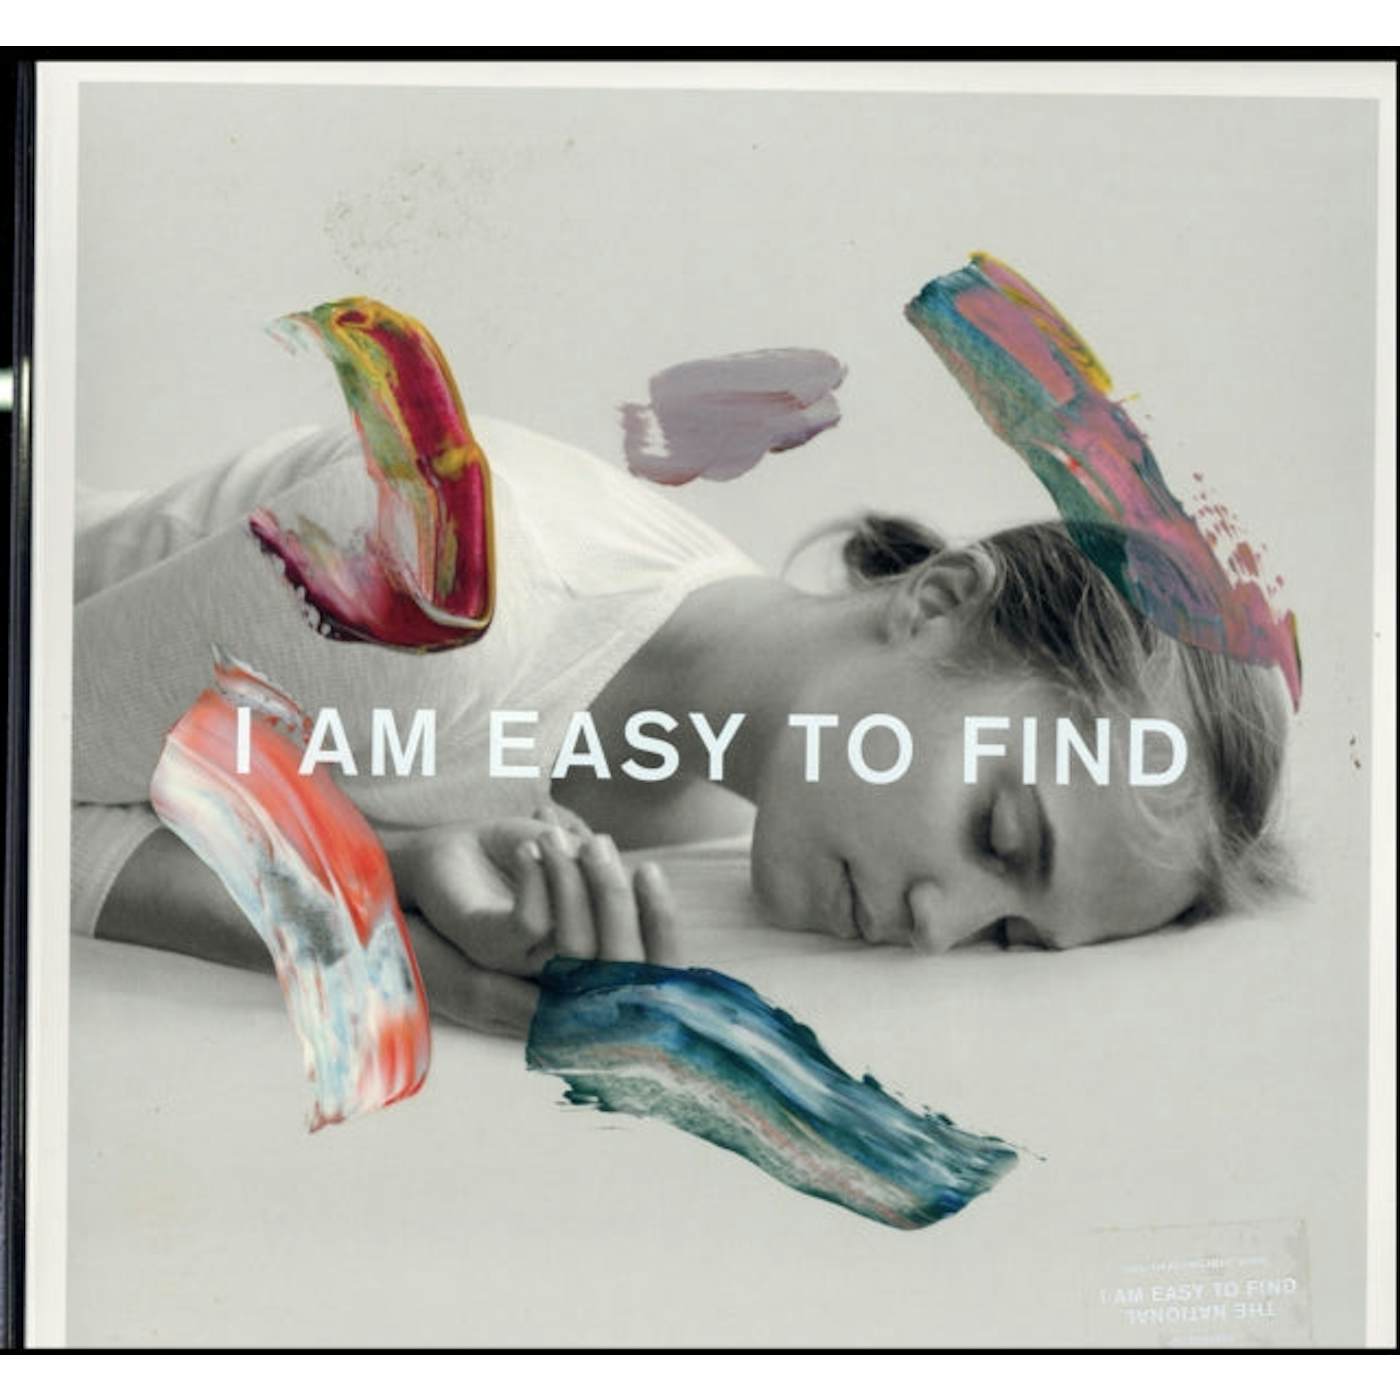 The National LP - I Am Easy To Find (Vinyl)